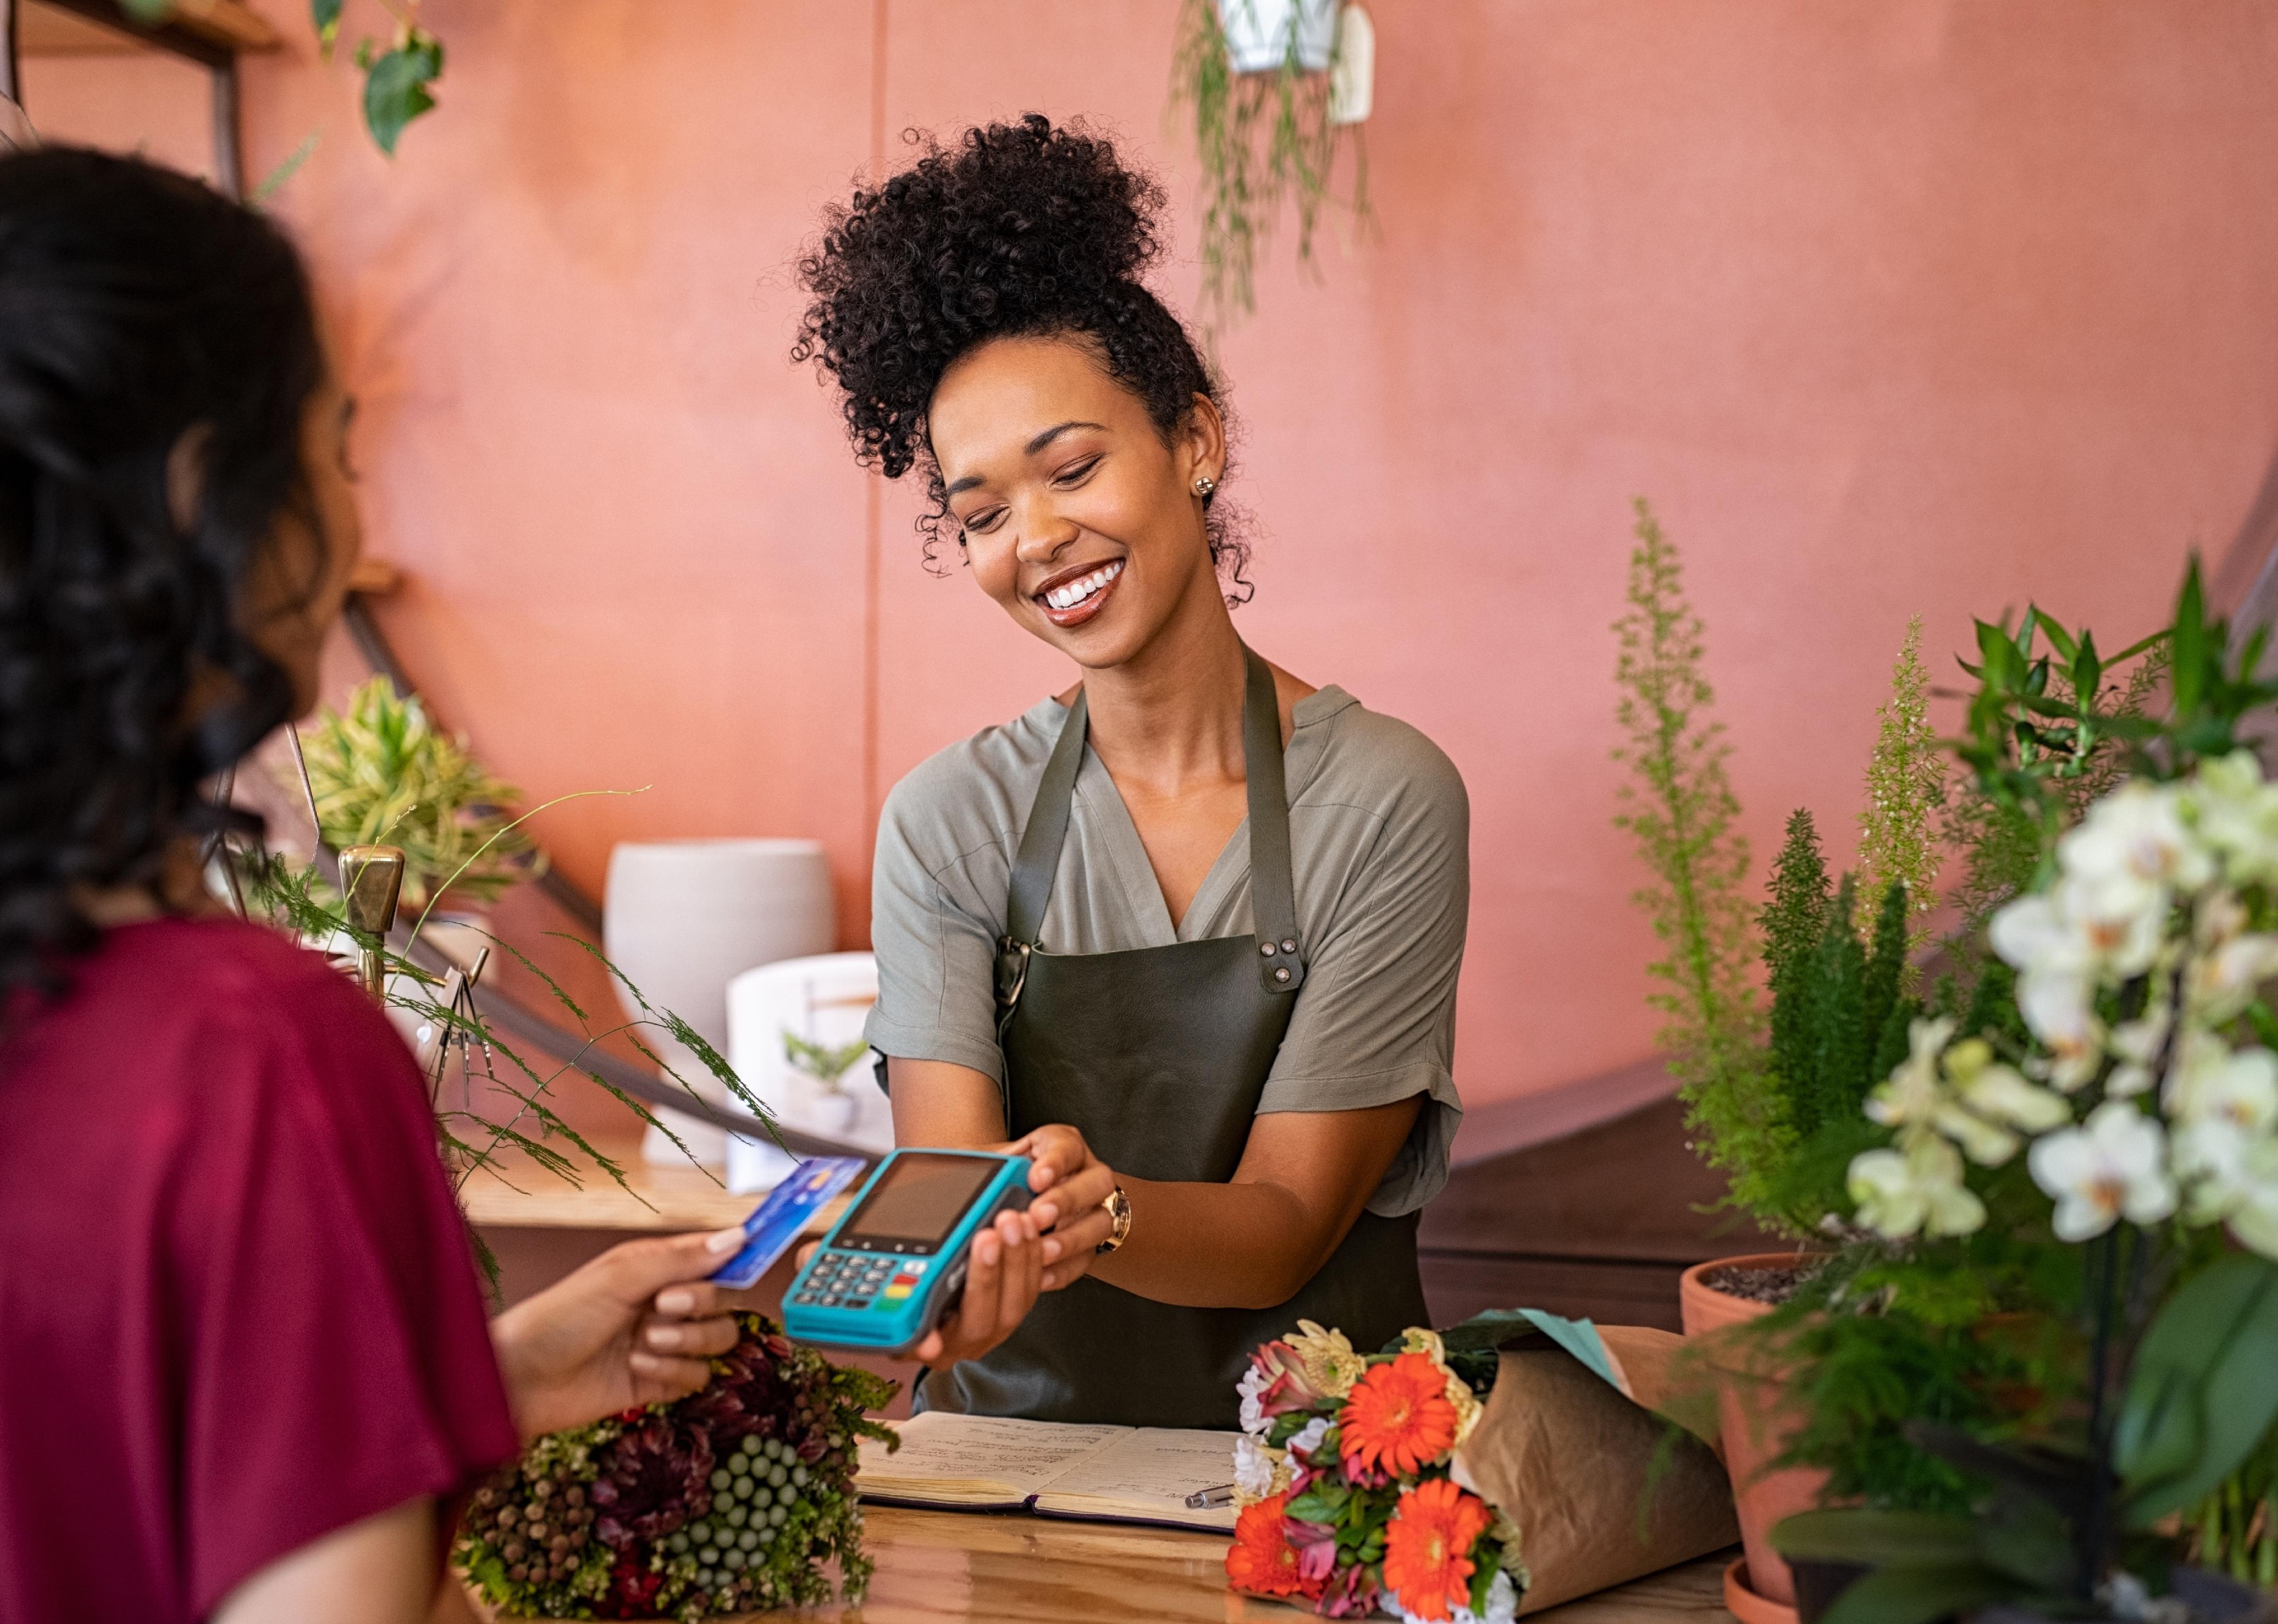 Smiling florist holding card reader machine with customer paying with credit card.